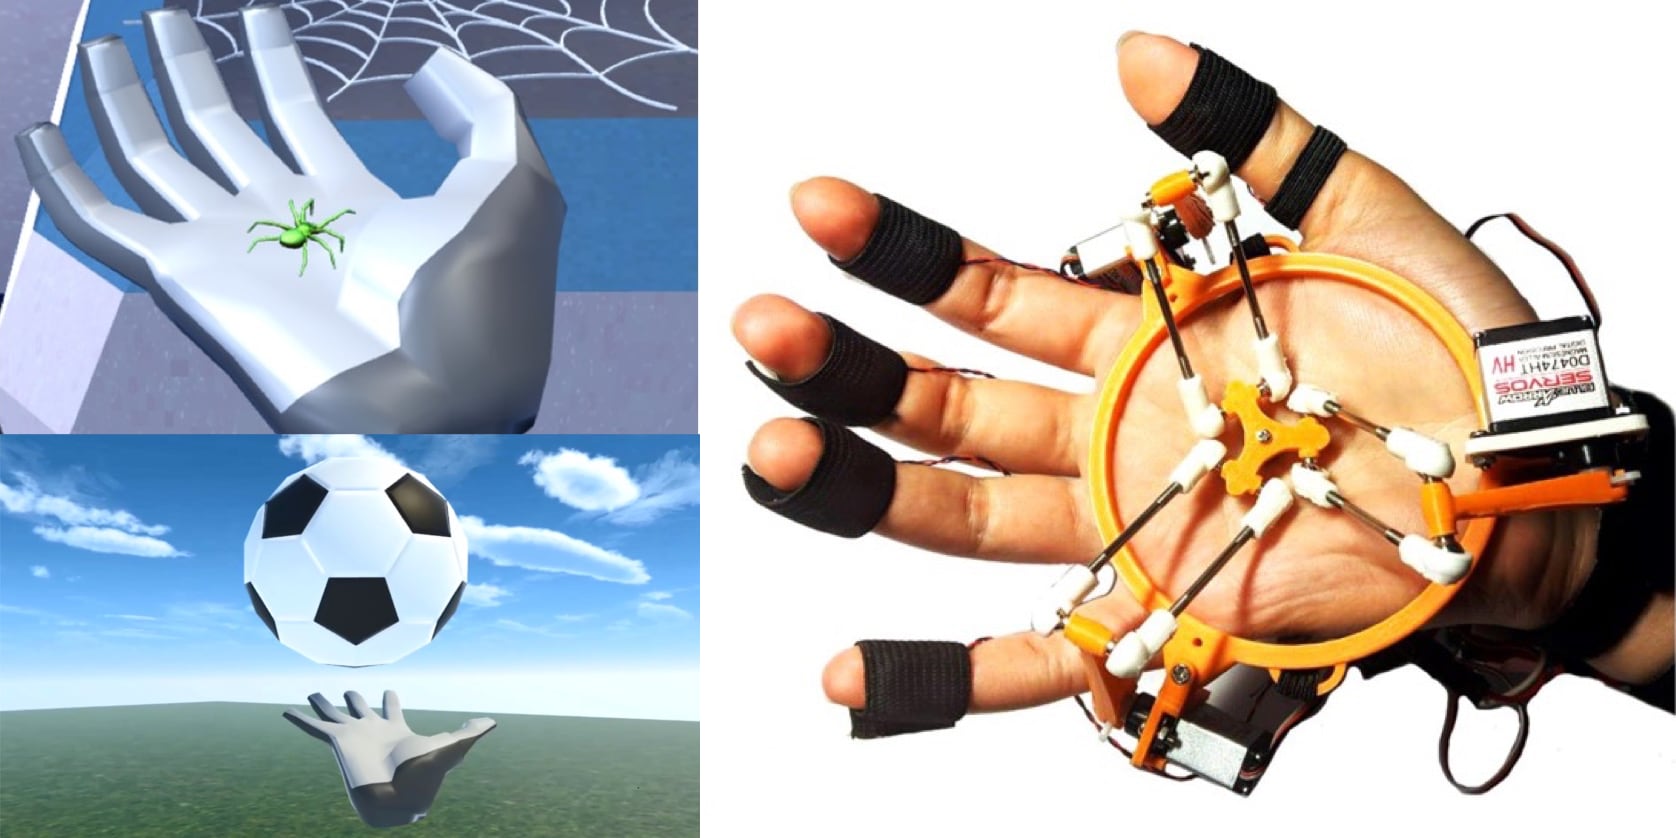 researchers-show-off-touchvr-palm-and-finger-haptic-feedback-device